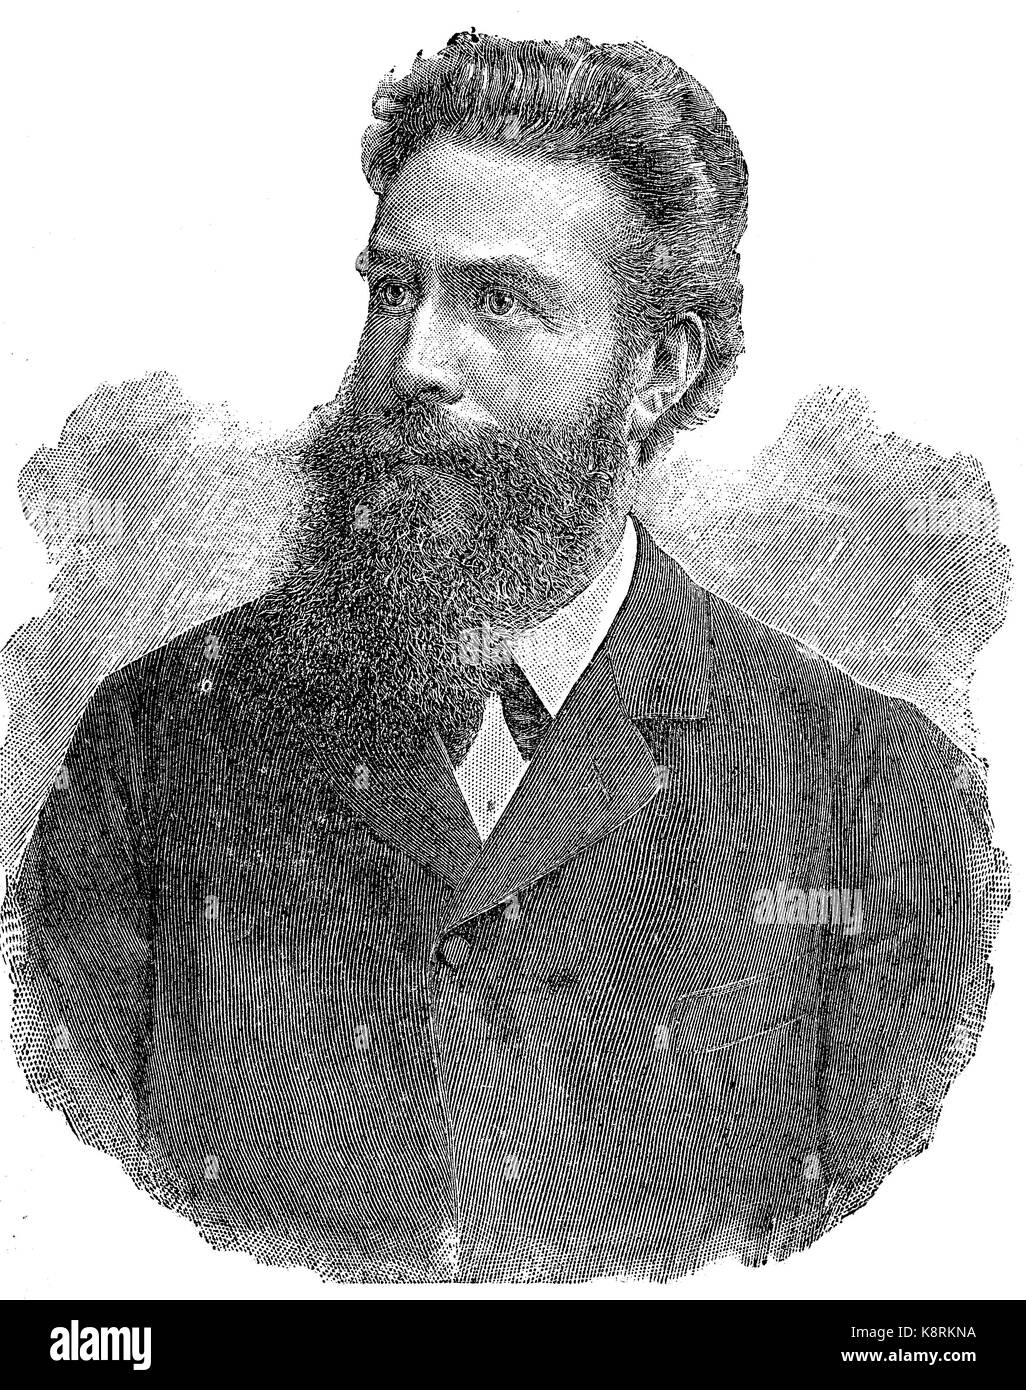 Wilhelm Conrad Röntgen, 1845 - 1923, a German mechanical engineer and physicist, who, on 8 November 1895, produced and detected electromagnetic radiation in a wavelength range known as X-rays or Röntgen rays, digital improved reproduction of a woodcut, published in the 19th century Stock Photo